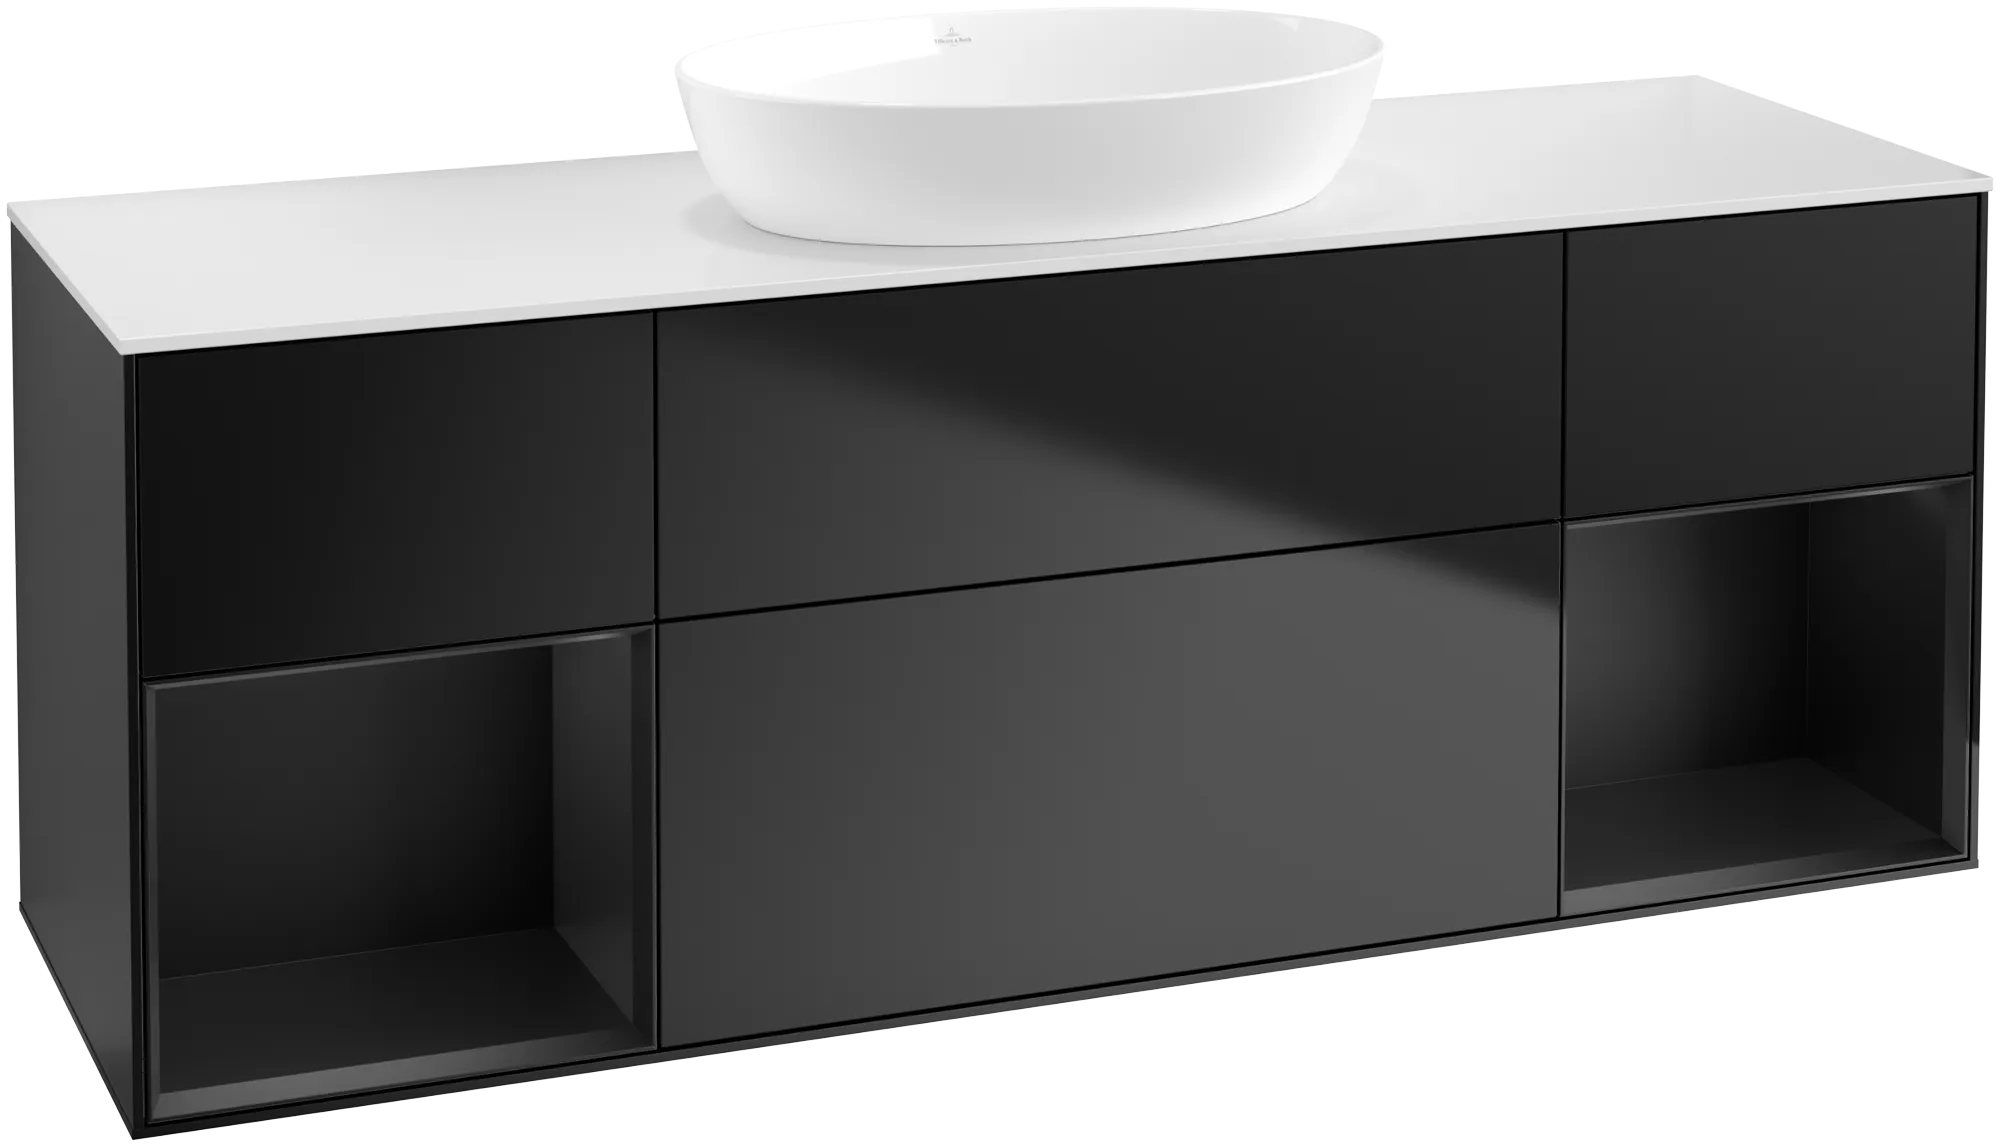 Picture of VILLEROY BOCH Finion Vanity unit, with lighting, 4 pull-out compartments, 1600 x 603 x 501 mm, Black Matt Lacquer / Black Matt Lacquer / Glass White Matt #GD01PDPD